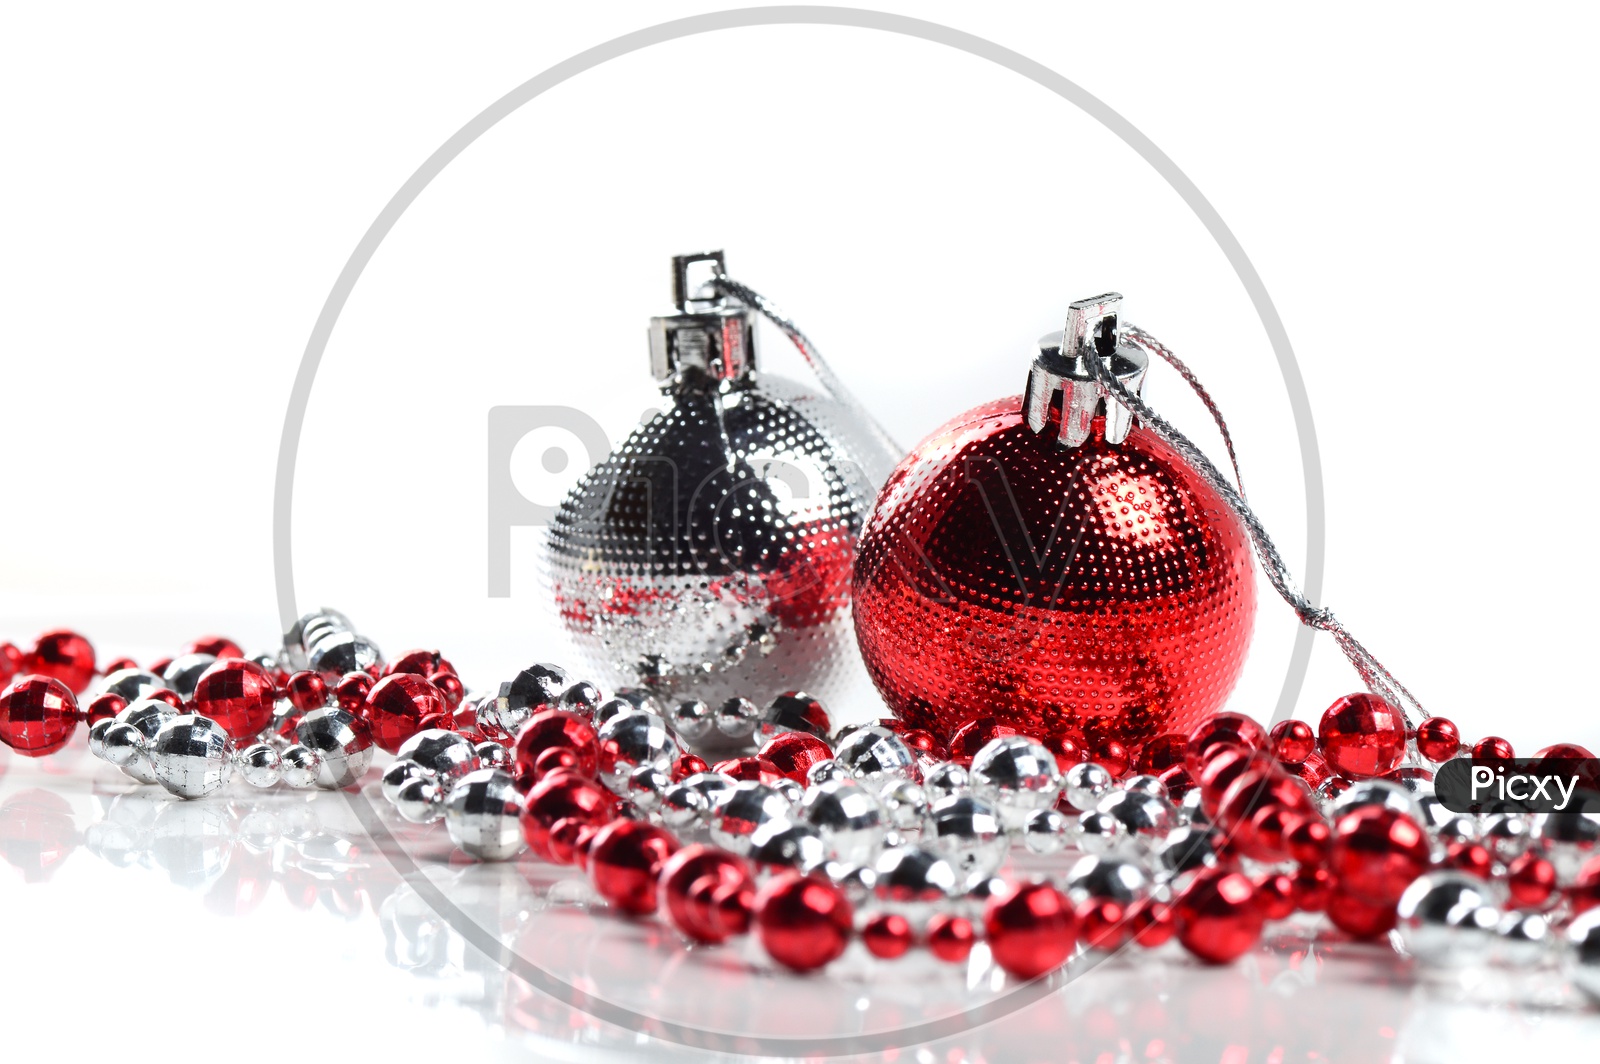 Christmas Tree Decoration Balls, Ornaments  And Chains on an Isolated White Background